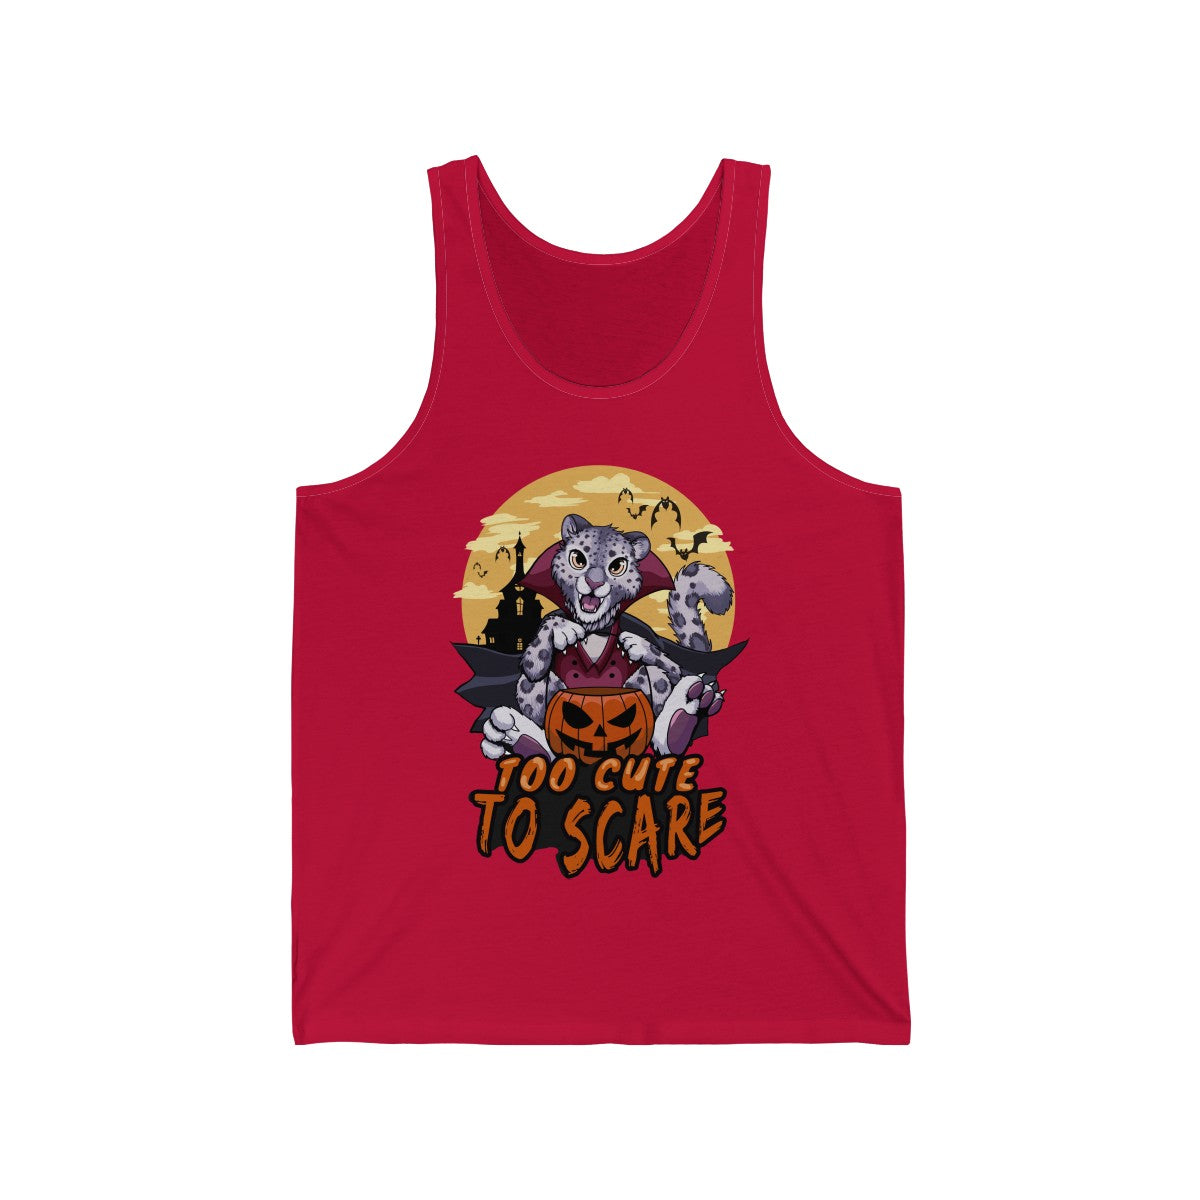 Too Cute to Scare - Tank Top Tank Top Artworktee Red XS 